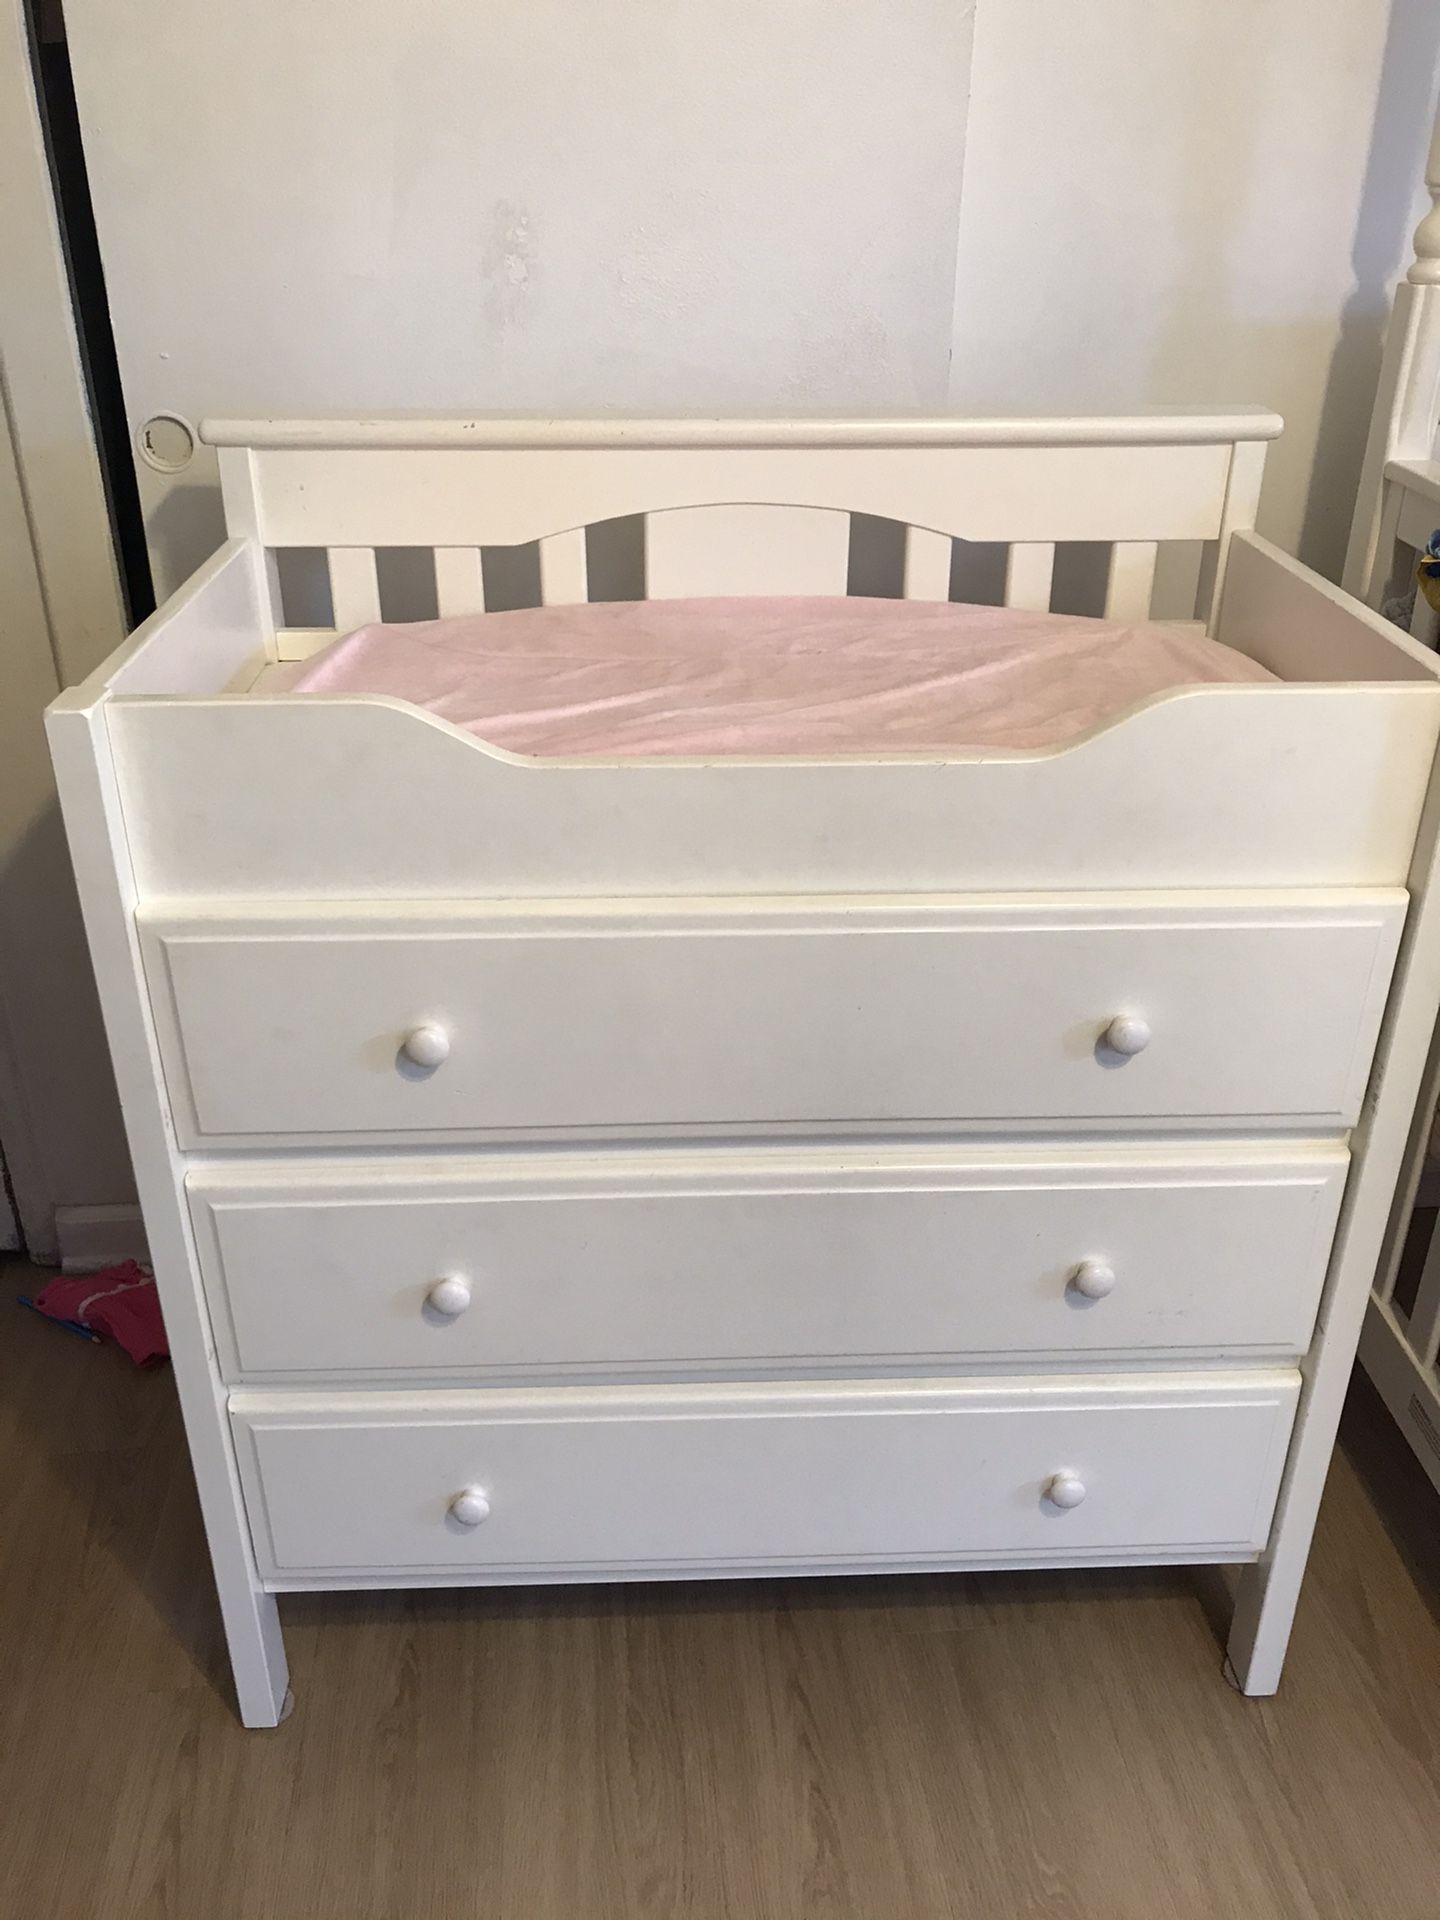 Baby changing table three drawer dresser all white with changing pad and two covers green and pink